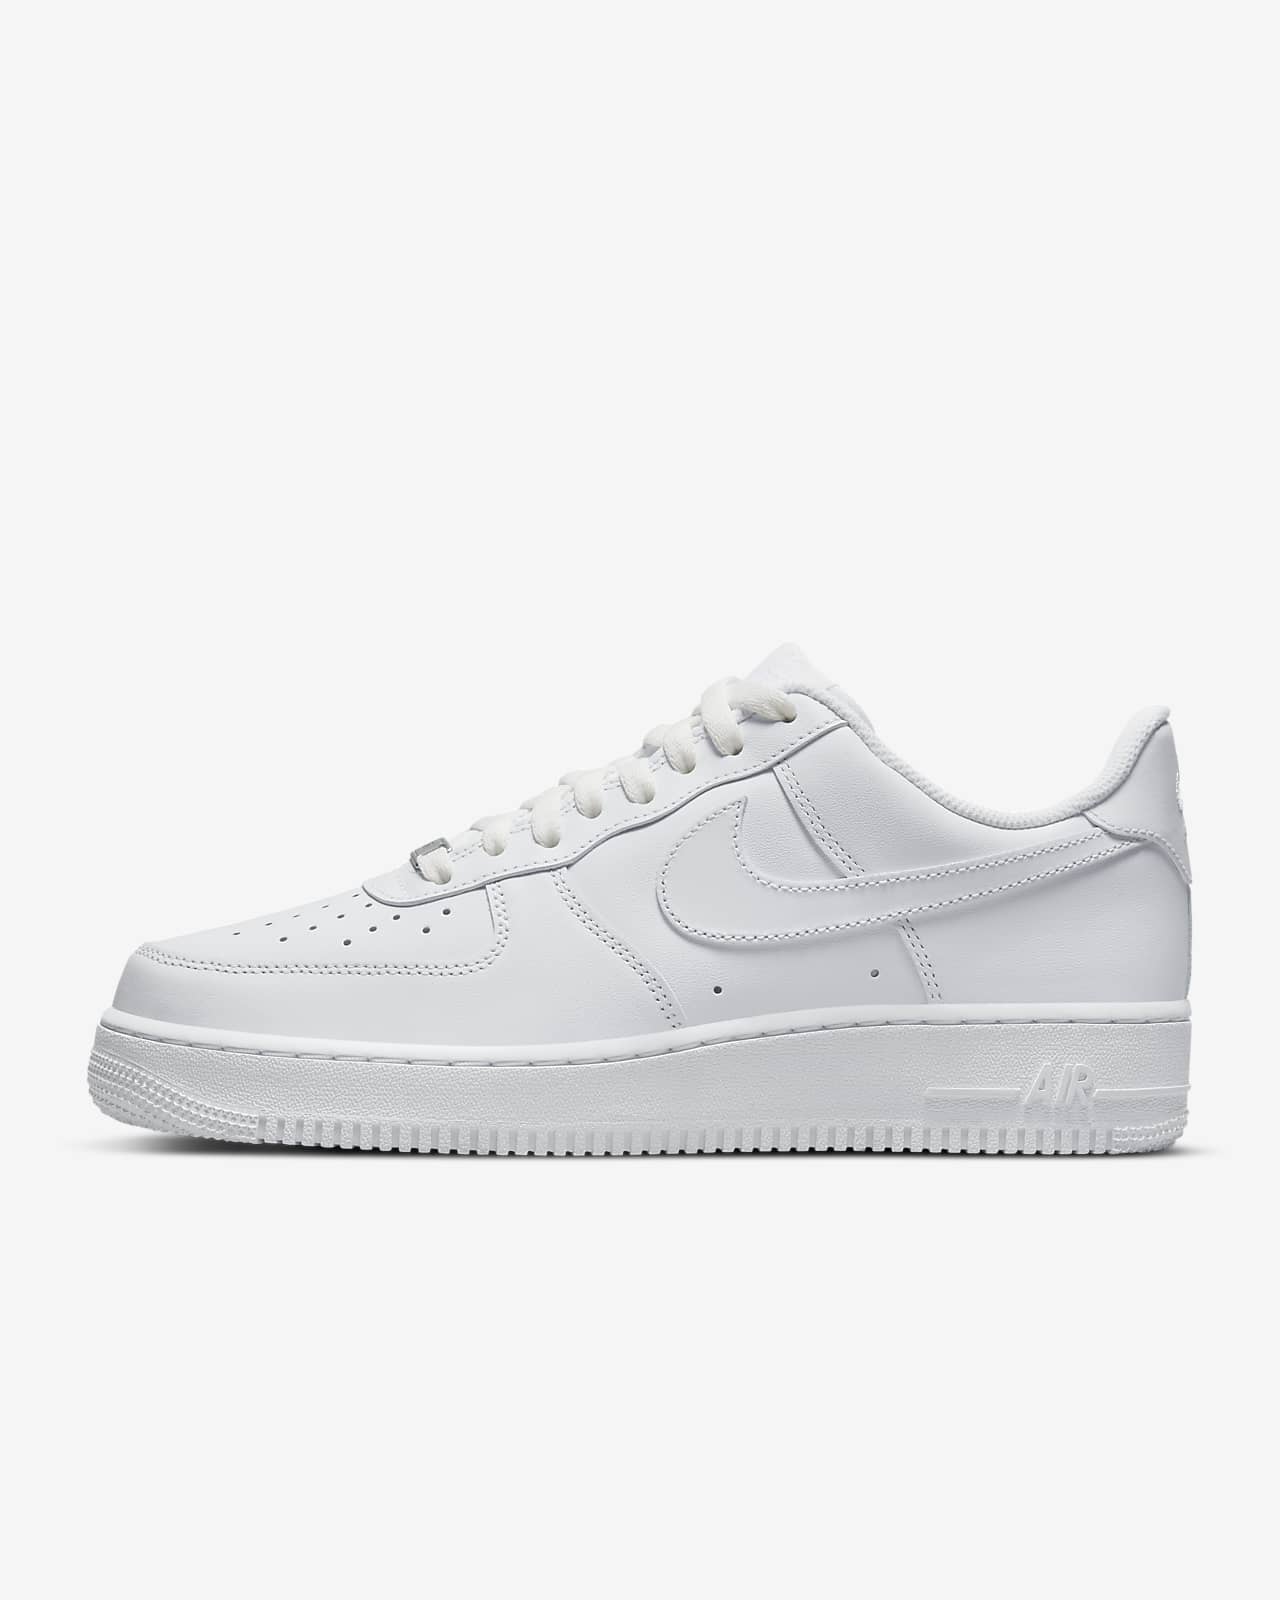 nike chaussure nike air force 1 '07 high pour homme